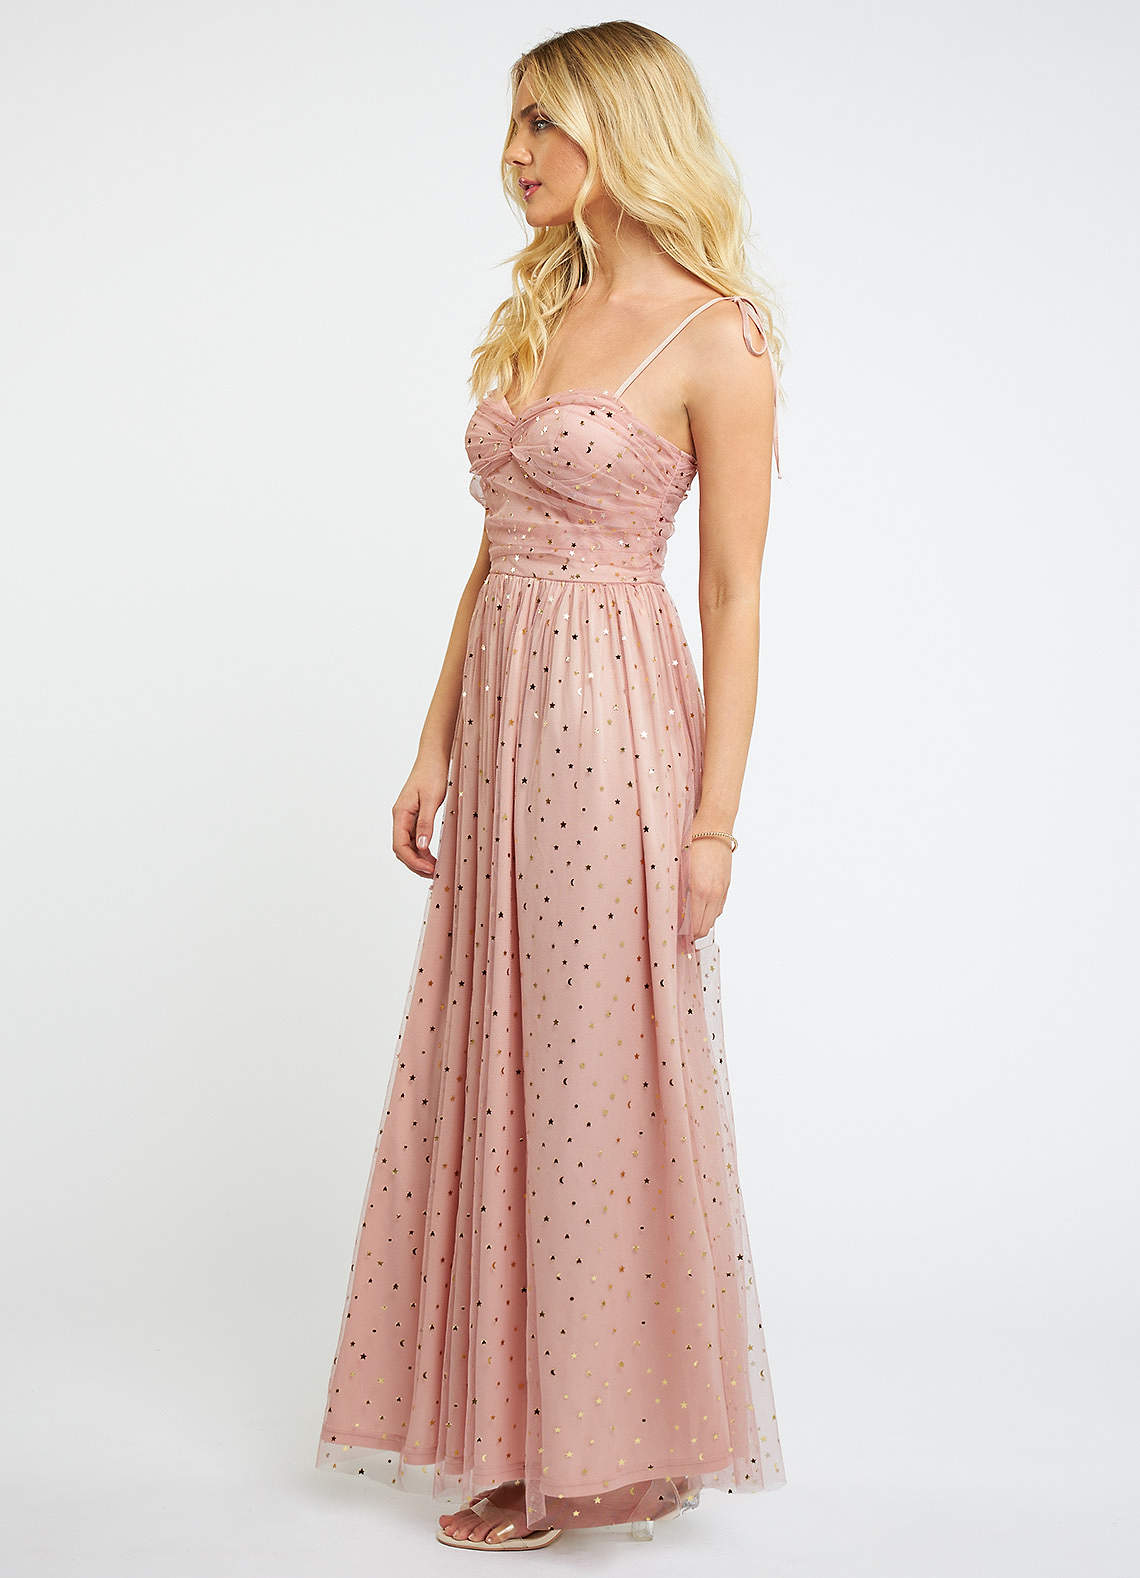 Lifetime of Love Blush Pink Tulle Maxi Dress